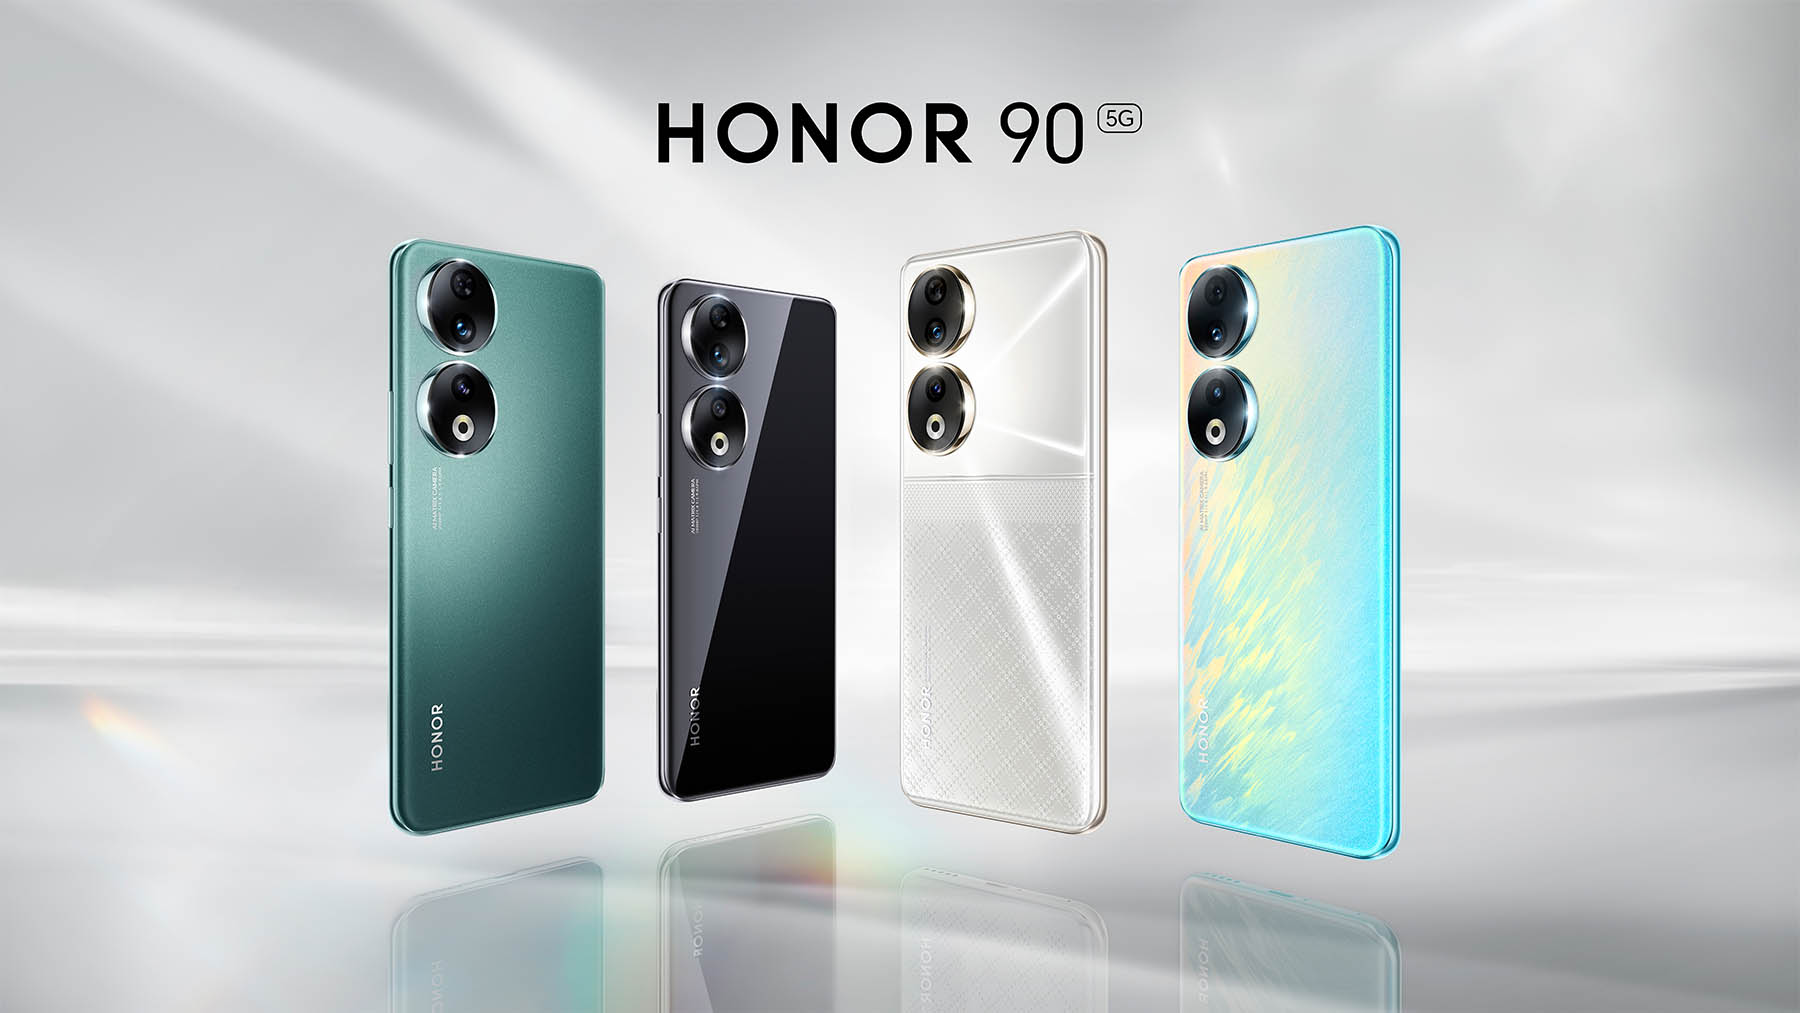 HONOR 90 colors